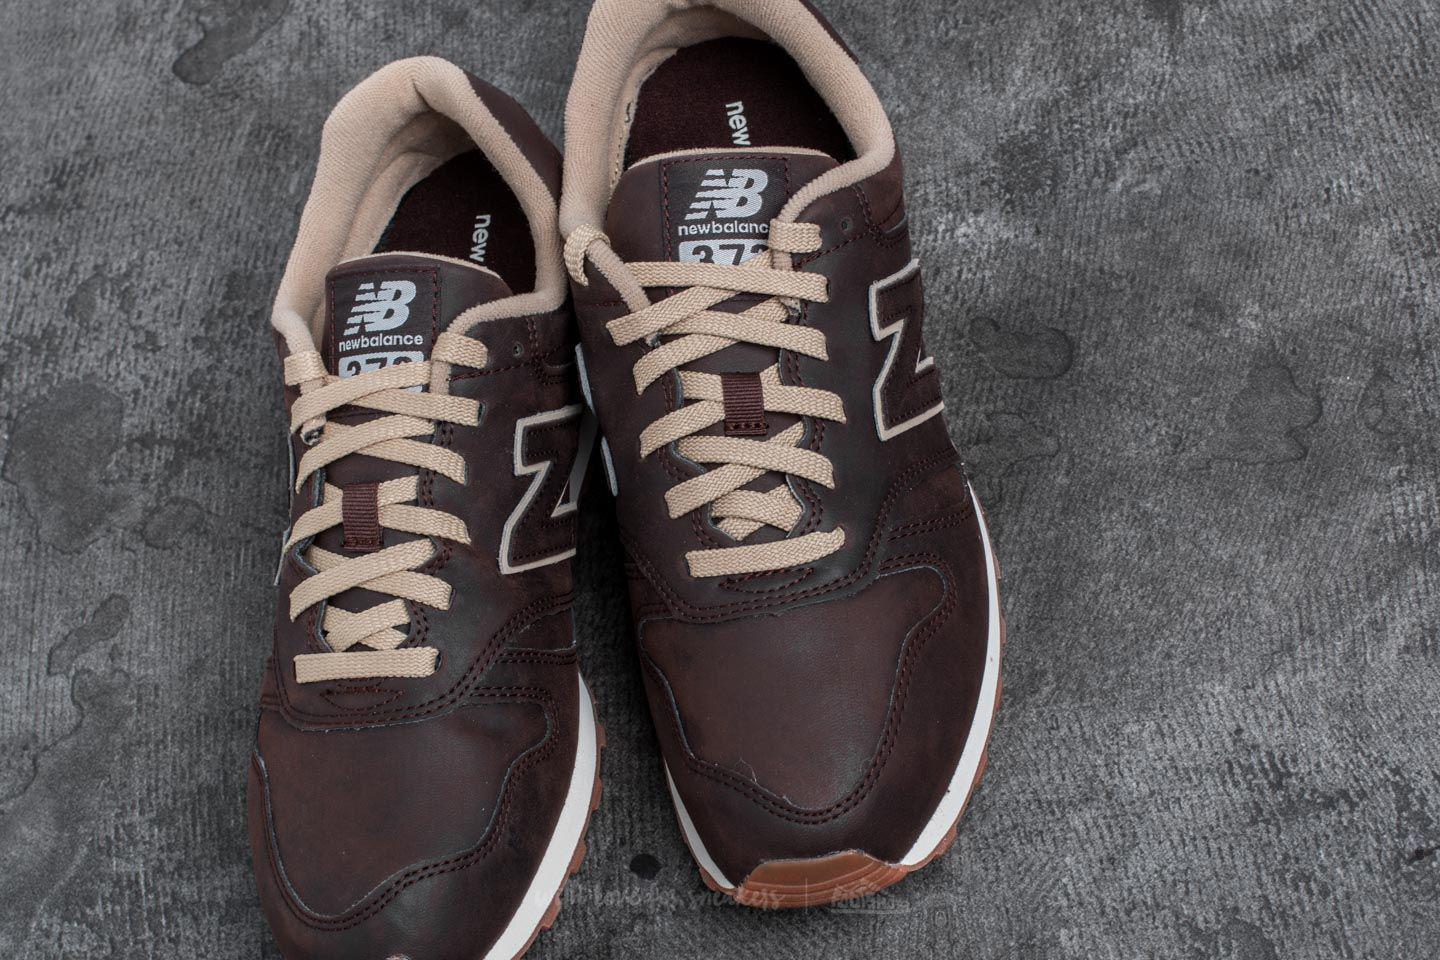 new balance 373 brown leather